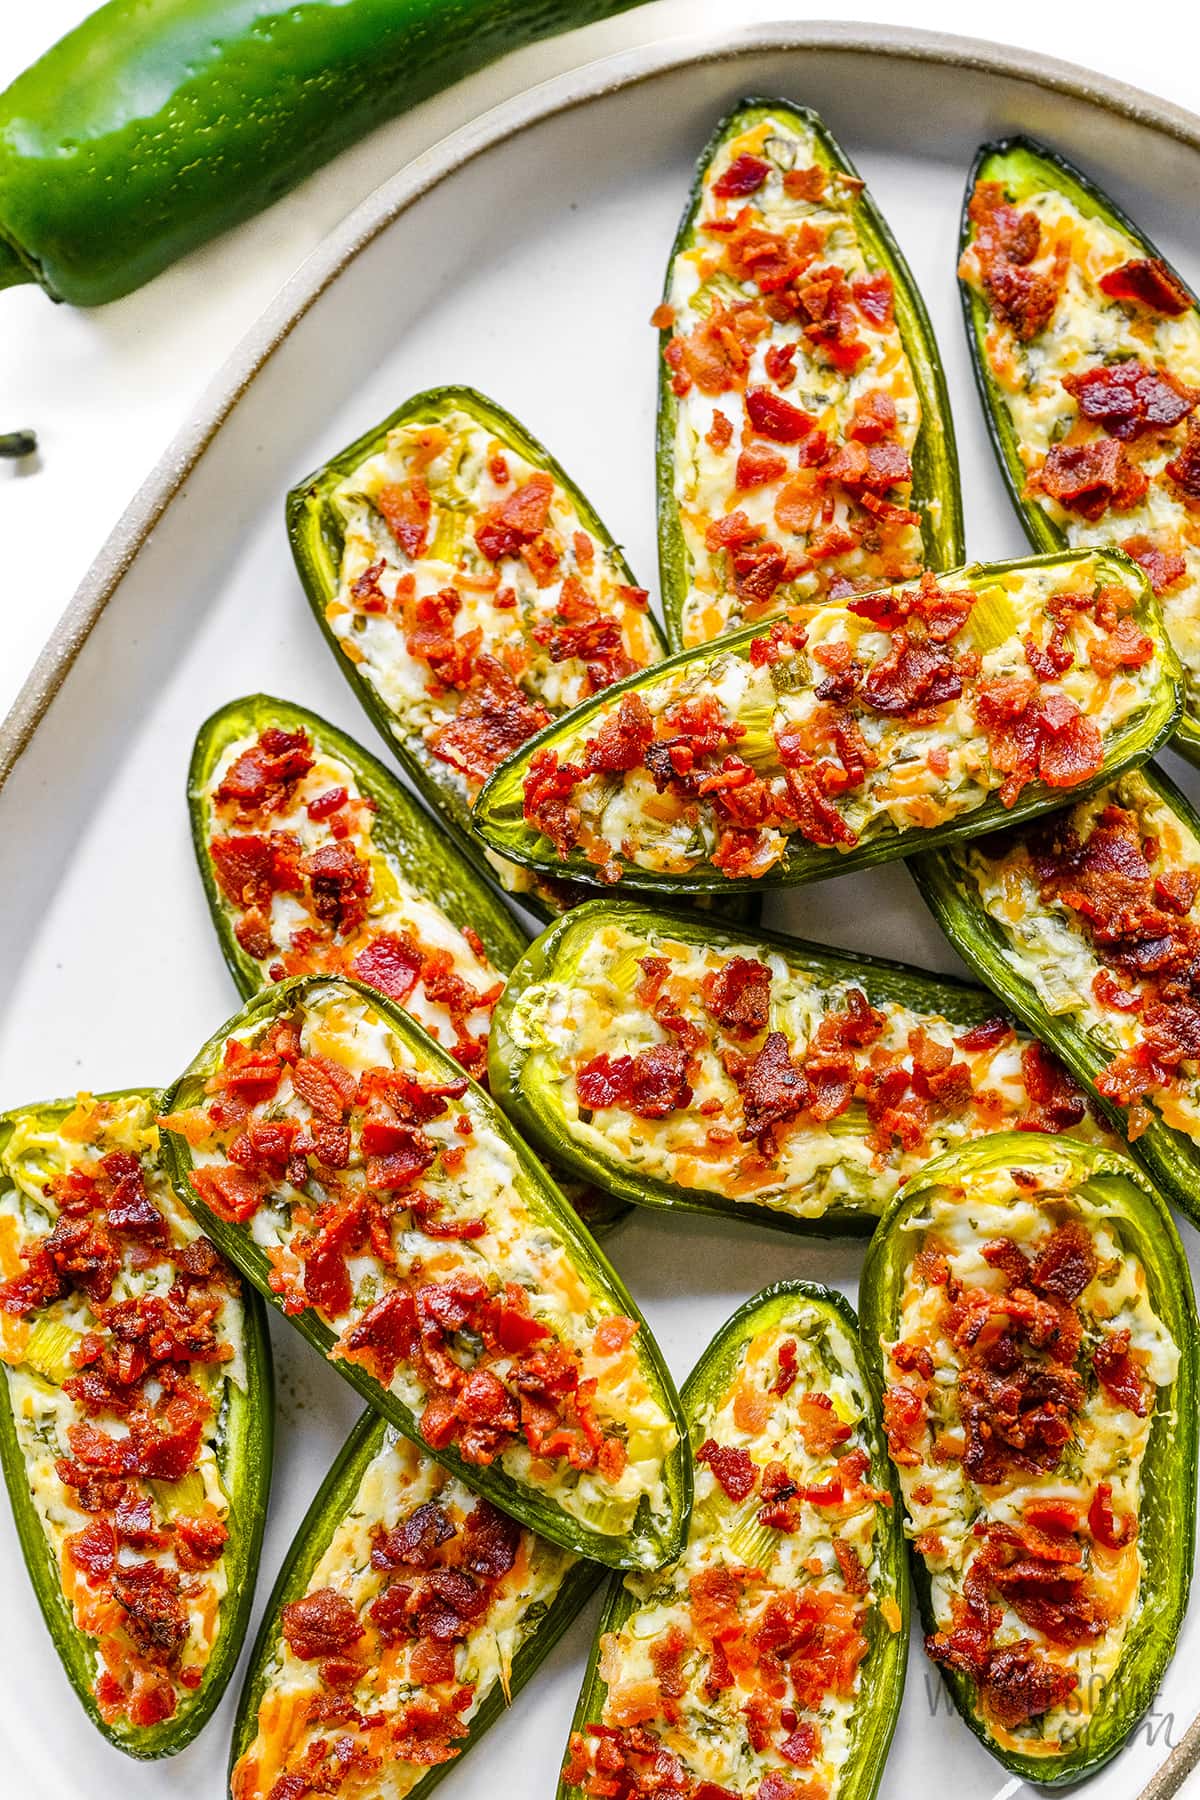 Jalapeno poppers are stacked together on a plate.